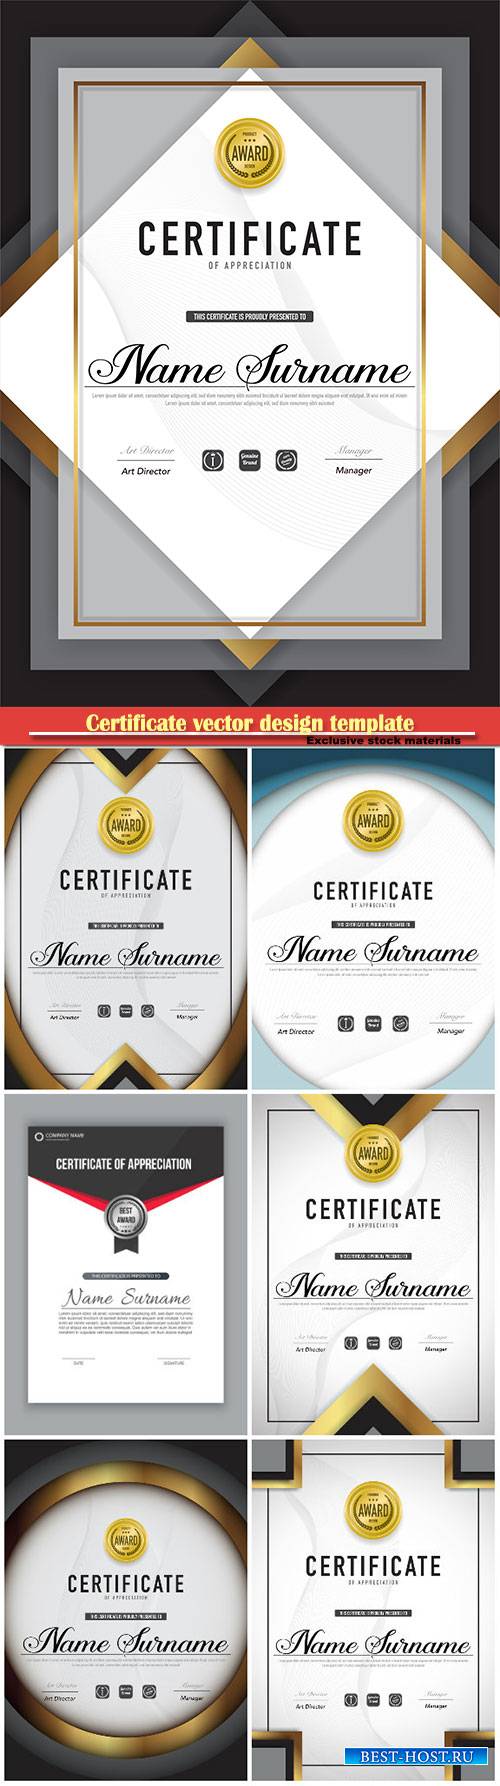 Certificate and vector diploma design template # 55